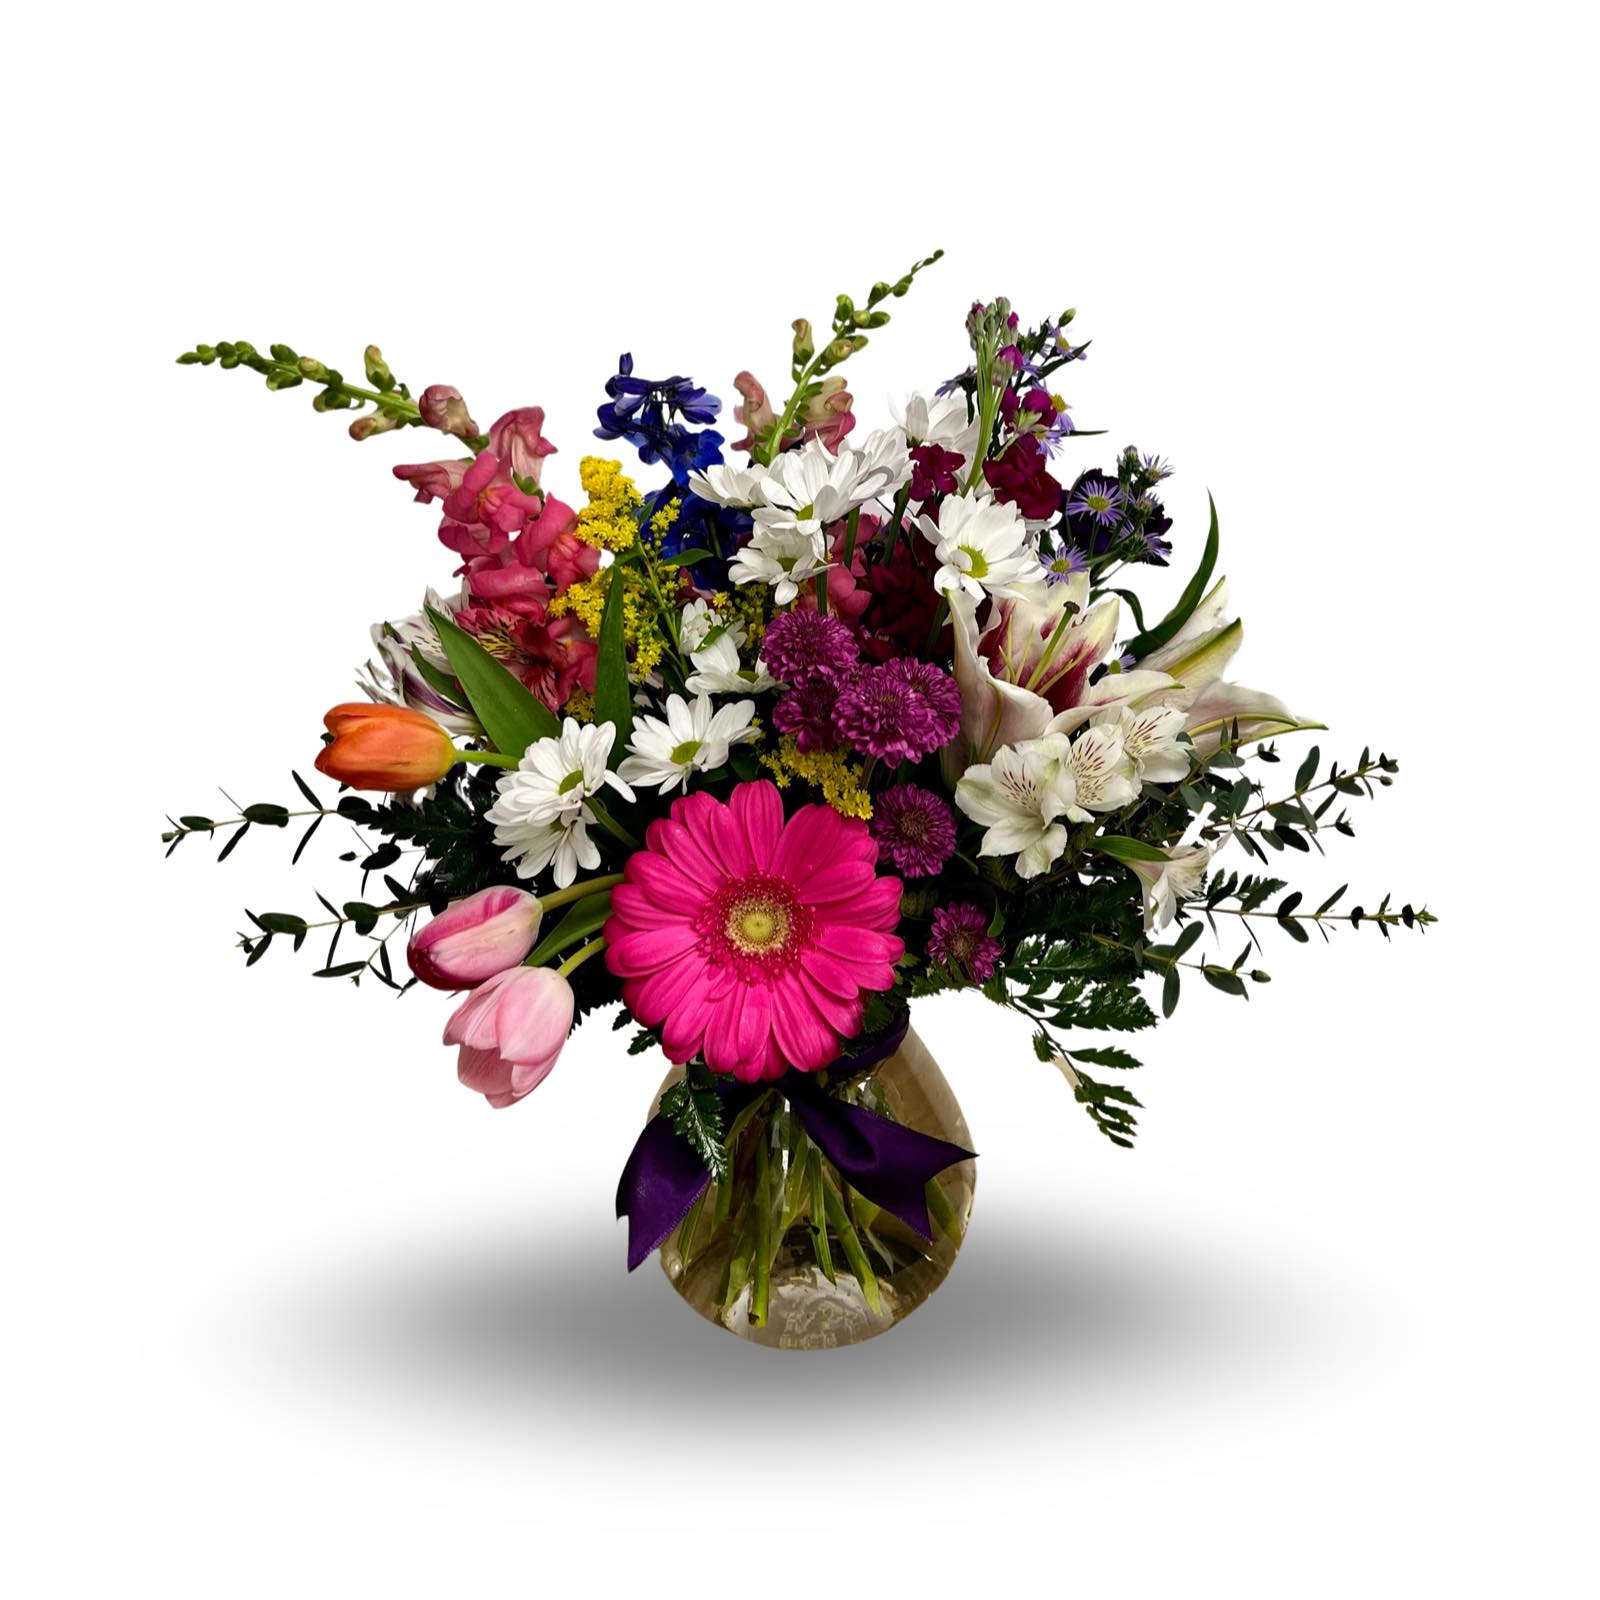 A M Floral and Gifts, LLC Formerly Linden Floral 18 W Main St, Fremont Michigan 49412